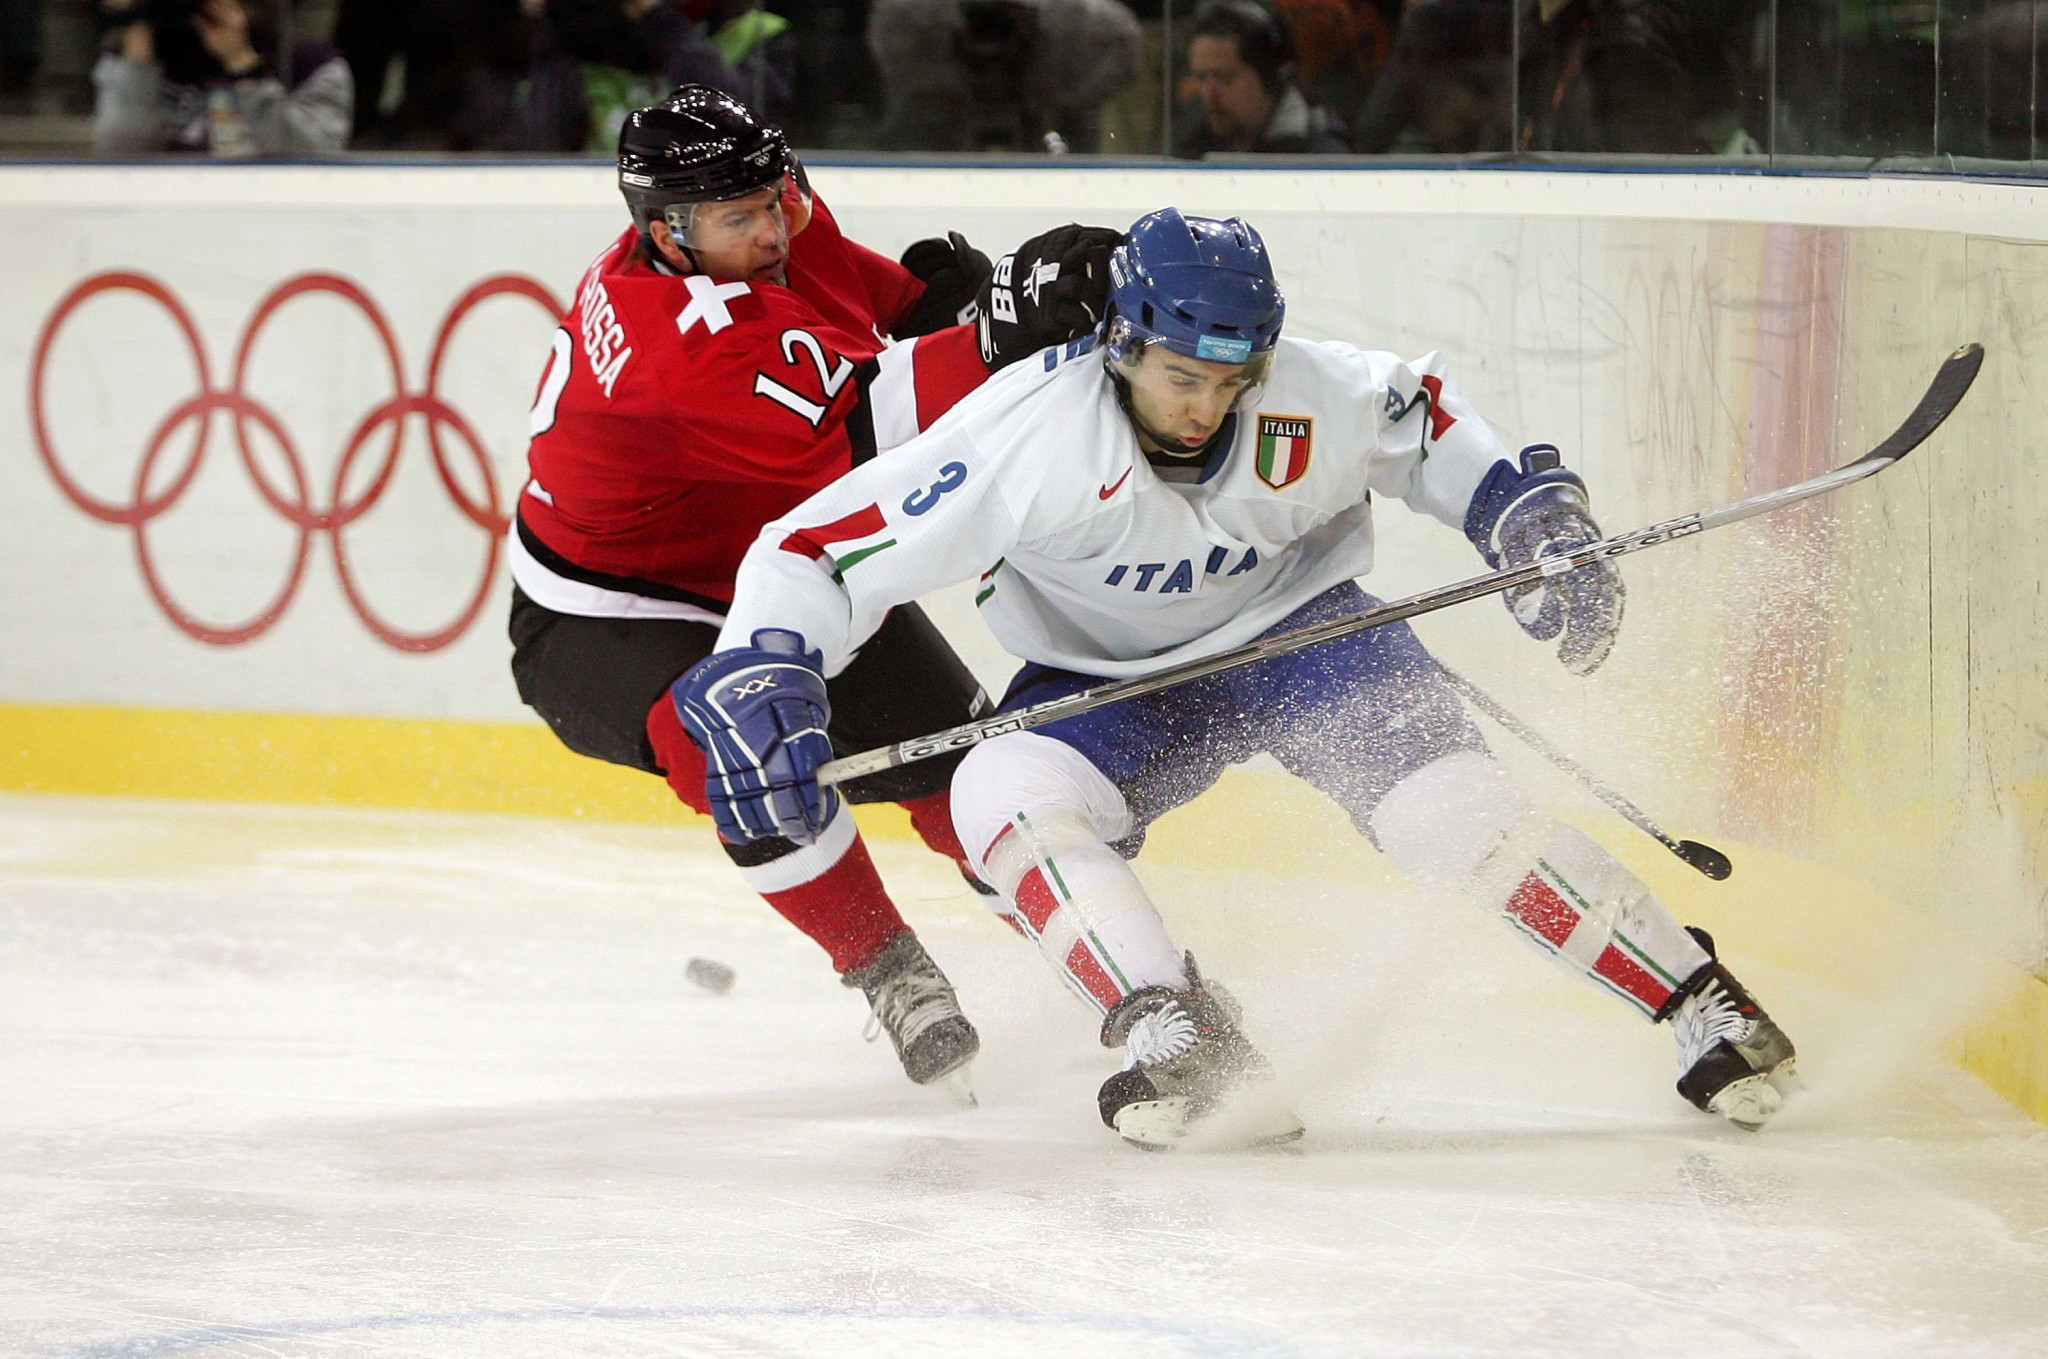 The budget for the main ice hockey venue, the PalaItalia, has increased by around €90 million ©Getty Images